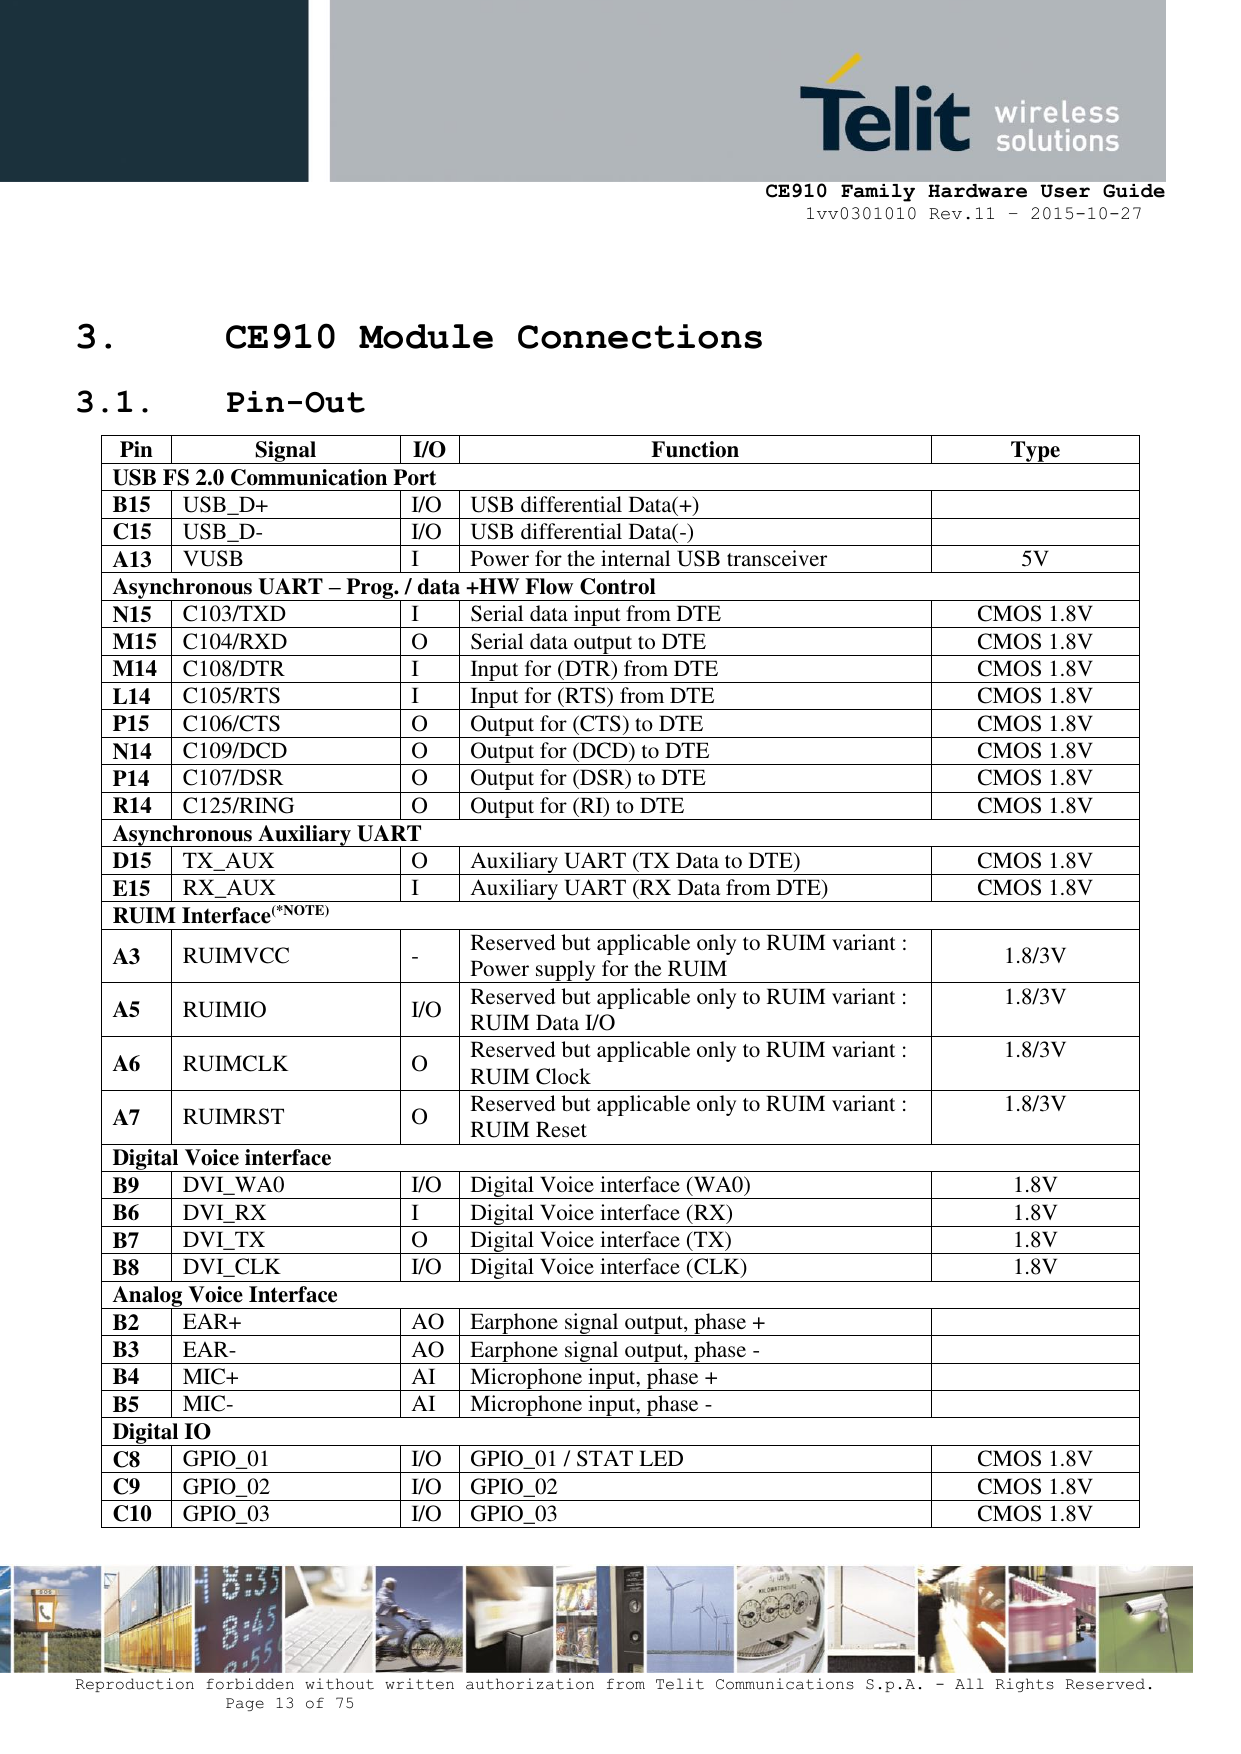     CE910 Family Hardware User Guide 1vv0301010 Rev.11 – 2015-10-27 Reproduction forbidden without written authorization from Telit Communications S.p.A. - All Rights Reserved.    Page 13 of 75                                                     3. CE910 Module Connections 3.1. Pin-Out Pin Signal I/O Function Type USB FS 2.0 Communication Port B15 USB_D+ I/O USB differential Data(+)  C15 USB_D- I/O USB differential Data(-)  A13 VUSB I Power for the internal USB transceiver 5V Asynchronous UART – Prog. / data +HW Flow Control N15 C103/TXD I Serial data input from DTE CMOS 1.8V M15 C104/RXD O Serial data output to DTE CMOS 1.8V M14 C108/DTR I Input for (DTR) from DTE CMOS 1.8V L14 C105/RTS I Input for (RTS) from DTE CMOS 1.8V P15 C106/CTS O Output for (CTS) to DTE CMOS 1.8V N14 C109/DCD O Output for (DCD) to DTE CMOS 1.8V P14 C107/DSR O Output for (DSR) to DTE CMOS 1.8V R14 C125/RING O Output for (RI) to DTE CMOS 1.8V Asynchronous Auxiliary UART D15 TX_AUX O Auxiliary UART (TX Data to DTE) CMOS 1.8V E15 RX_AUX I Auxiliary UART (RX Data from DTE) CMOS 1.8V RUIM Interface(*NOTE) A3 RUIMVCC - Reserved but applicable only to RUIM variant : Power supply for the RUIM 1.8/3V A5 RUIMIO I/O Reserved but applicable only to RUIM variant : RUIM Data I/O 1.8/3V A6 RUIMCLK O Reserved but applicable only to RUIM variant : RUIM Clock 1.8/3V A7 RUIMRST O Reserved but applicable only to RUIM variant : RUIM Reset 1.8/3V Digital Voice interface B9 DVI_WA0 I/O Digital Voice interface (WA0) 1.8V B6 DVI_RX I Digital Voice interface (RX) 1.8V B7 DVI_TX O Digital Voice interface (TX) 1.8V B8 DVI_CLK I/O Digital Voice interface (CLK) 1.8V Analog Voice Interface  B2 EAR+ AO Earphone signal output, phase +  B3 EAR- AO Earphone signal output, phase -  B4 MIC+ AI Microphone input, phase +  B5 MIC- AI Microphone input, phase -  Digital IO C8 GPIO_01 I/O GPIO_01 / STAT LED CMOS 1.8V C9 GPIO_02 I/O GPIO_02 CMOS 1.8V C10 GPIO_03 I/O GPIO_03 CMOS 1.8V 